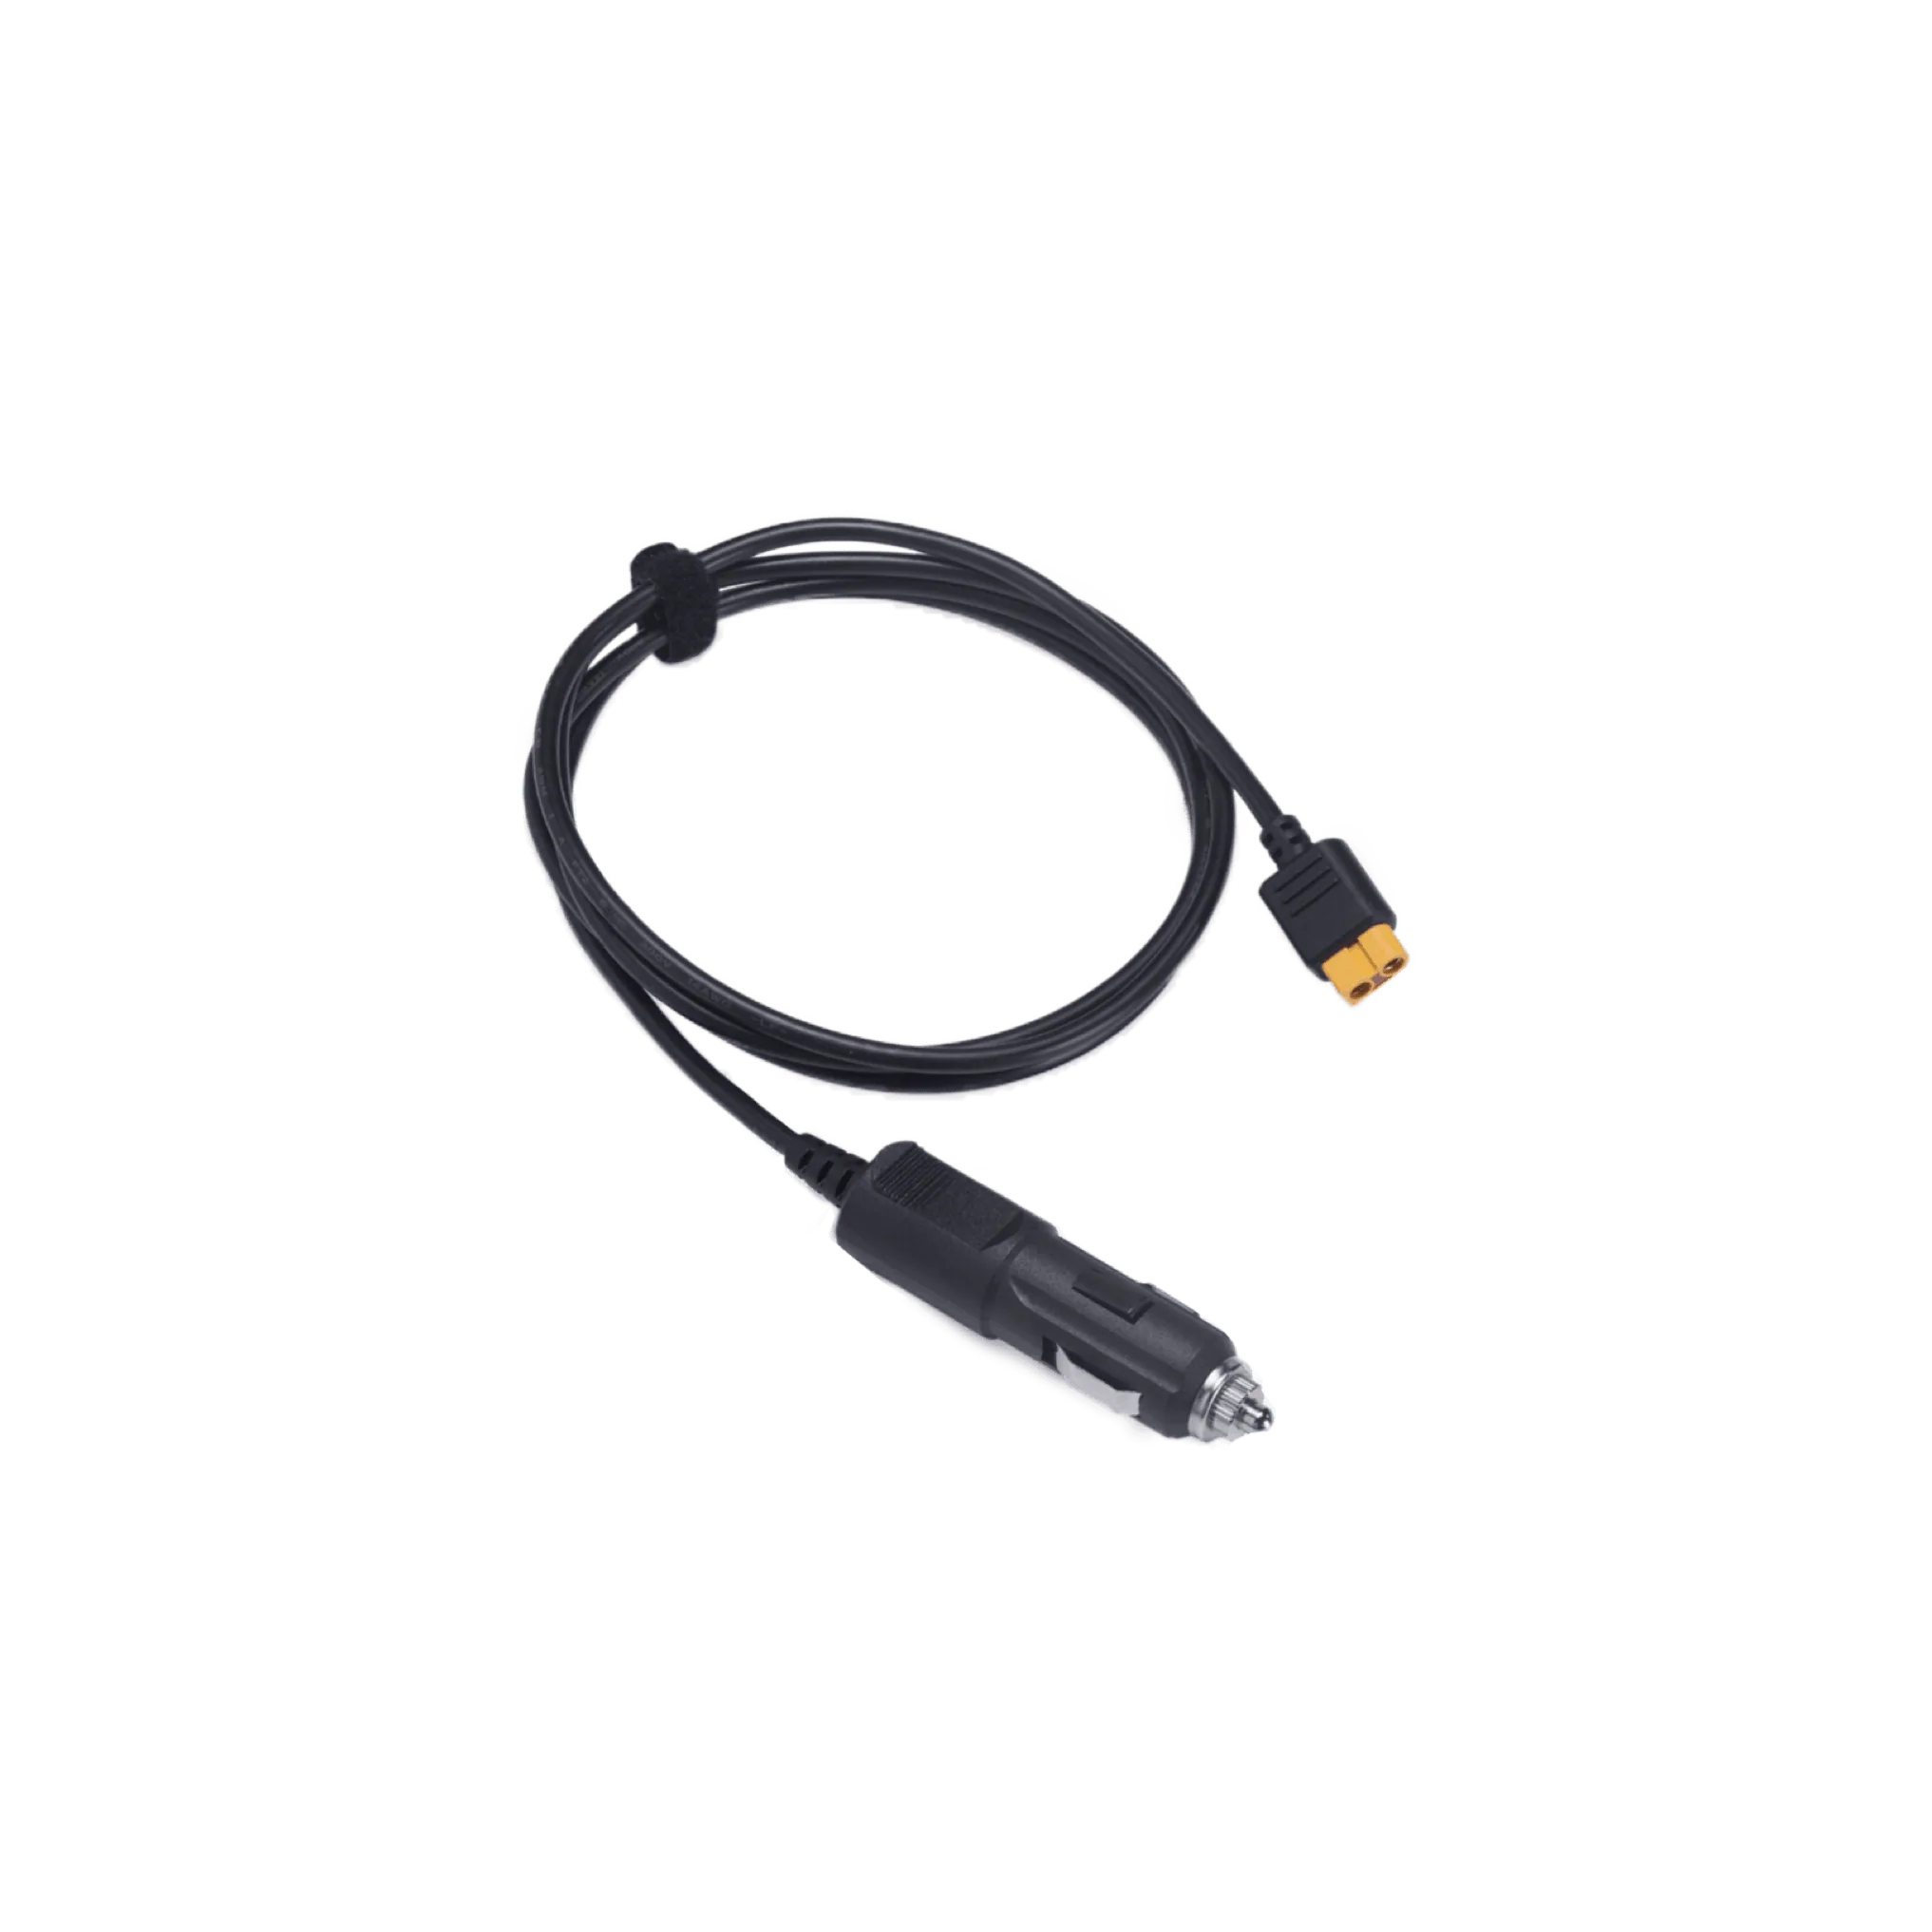 A black EcoFlow Car Charging Cable with a yellow plug on it (SHIPS IN 1-2 WEEKS).